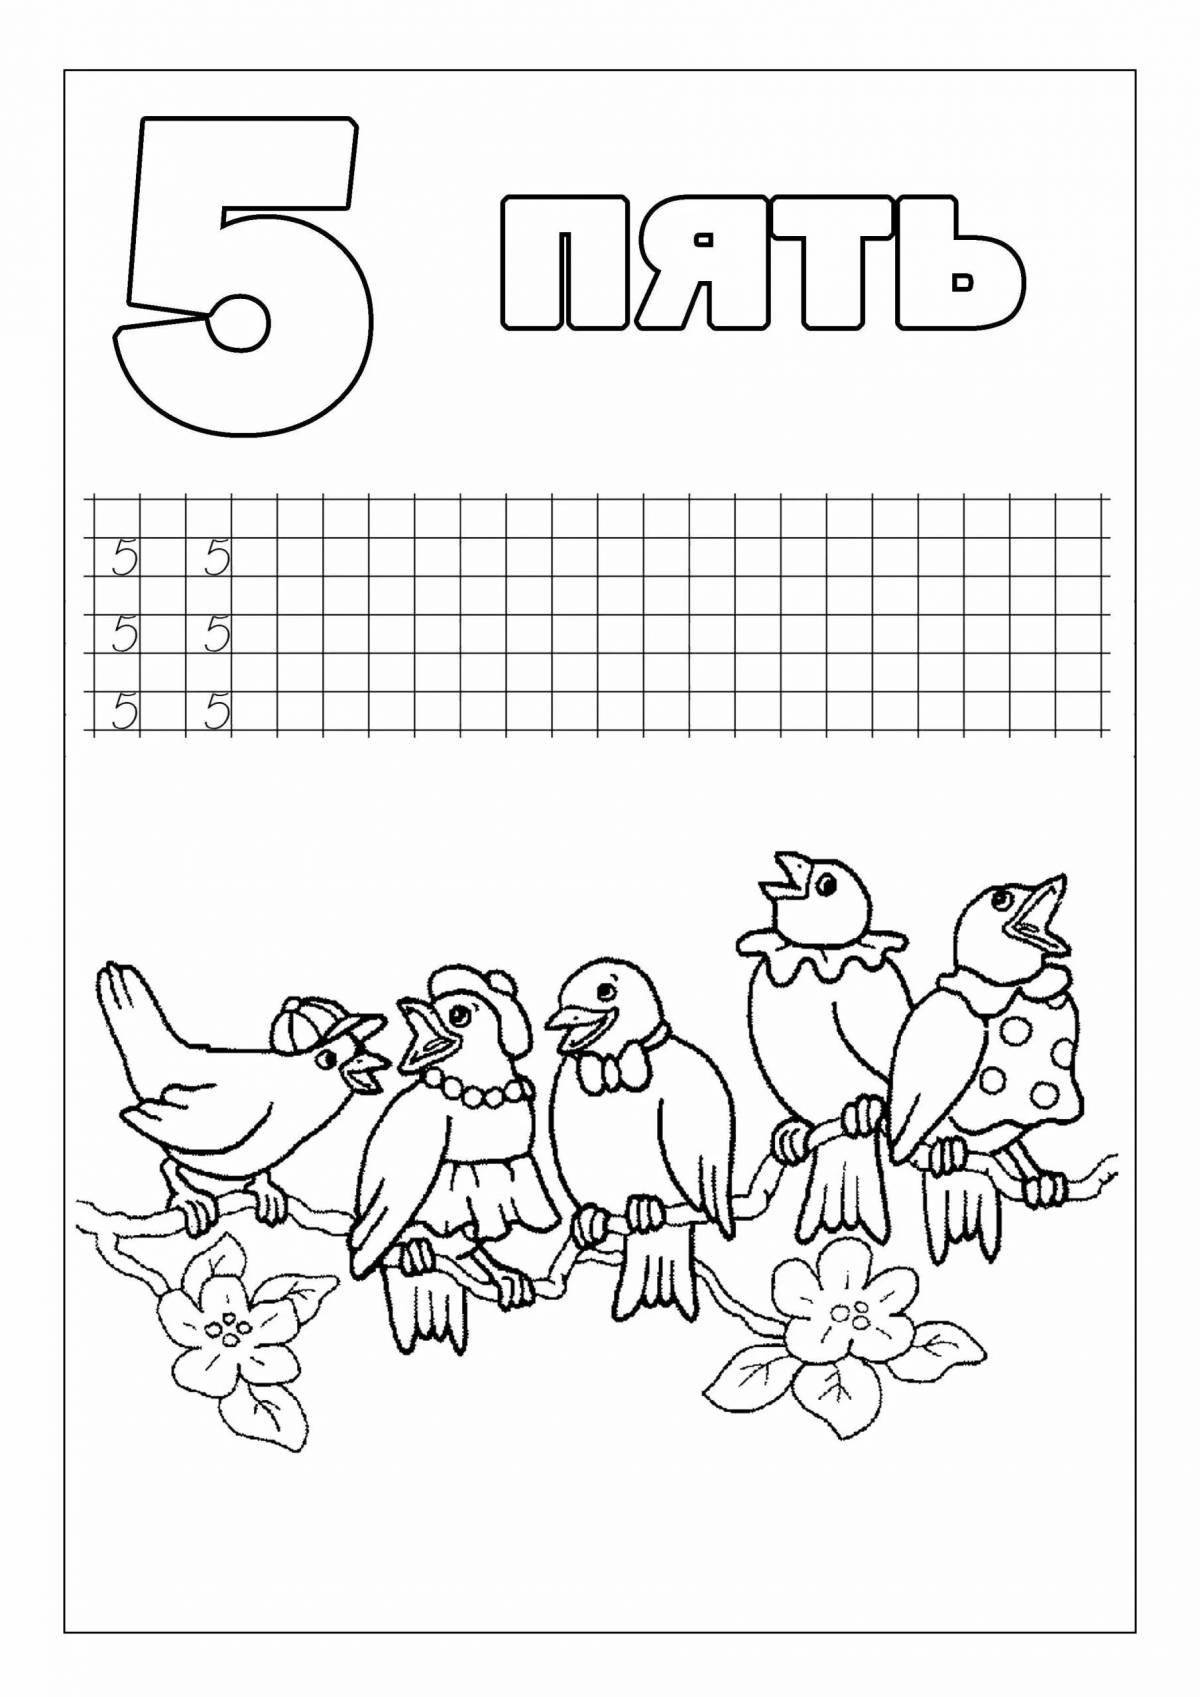 Colorful bright coloring page number 5 spelling